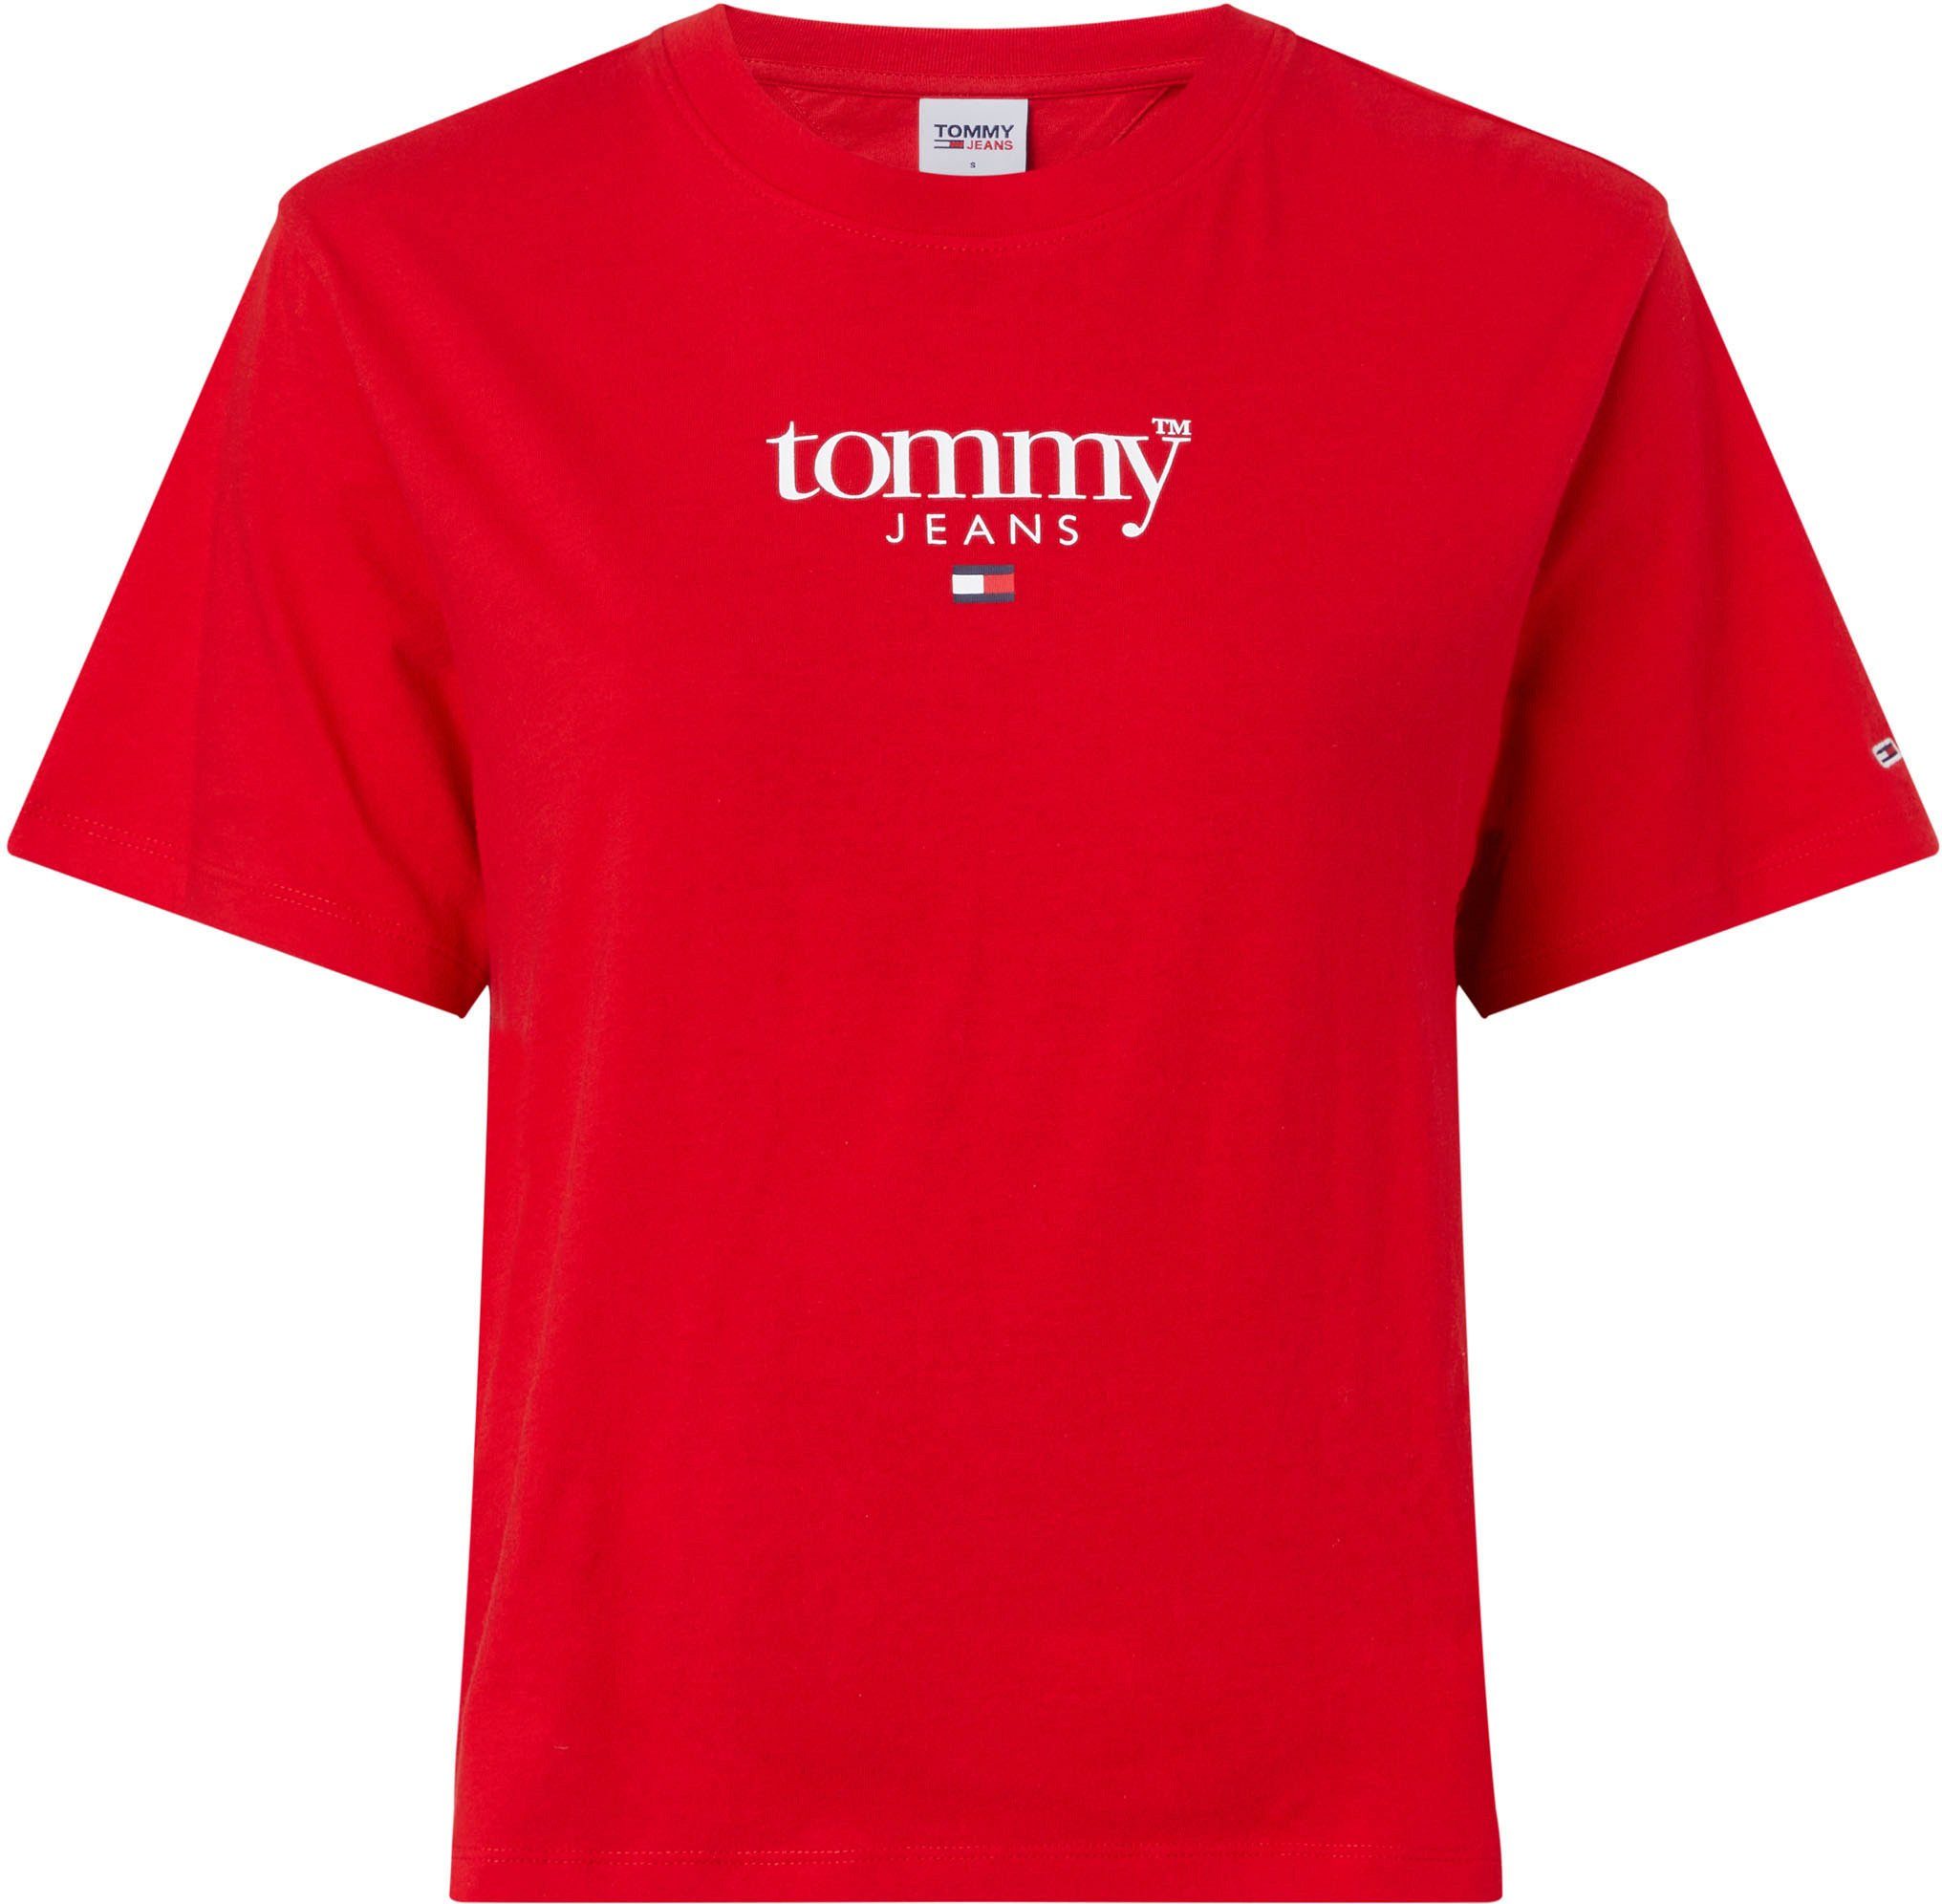 Tommy Jeans Kurzarmshirt 1 Logo-Flag Jeans Tommy SS TJW hellrot mit CLASSIC gestickter LOGO ESSENTIAL